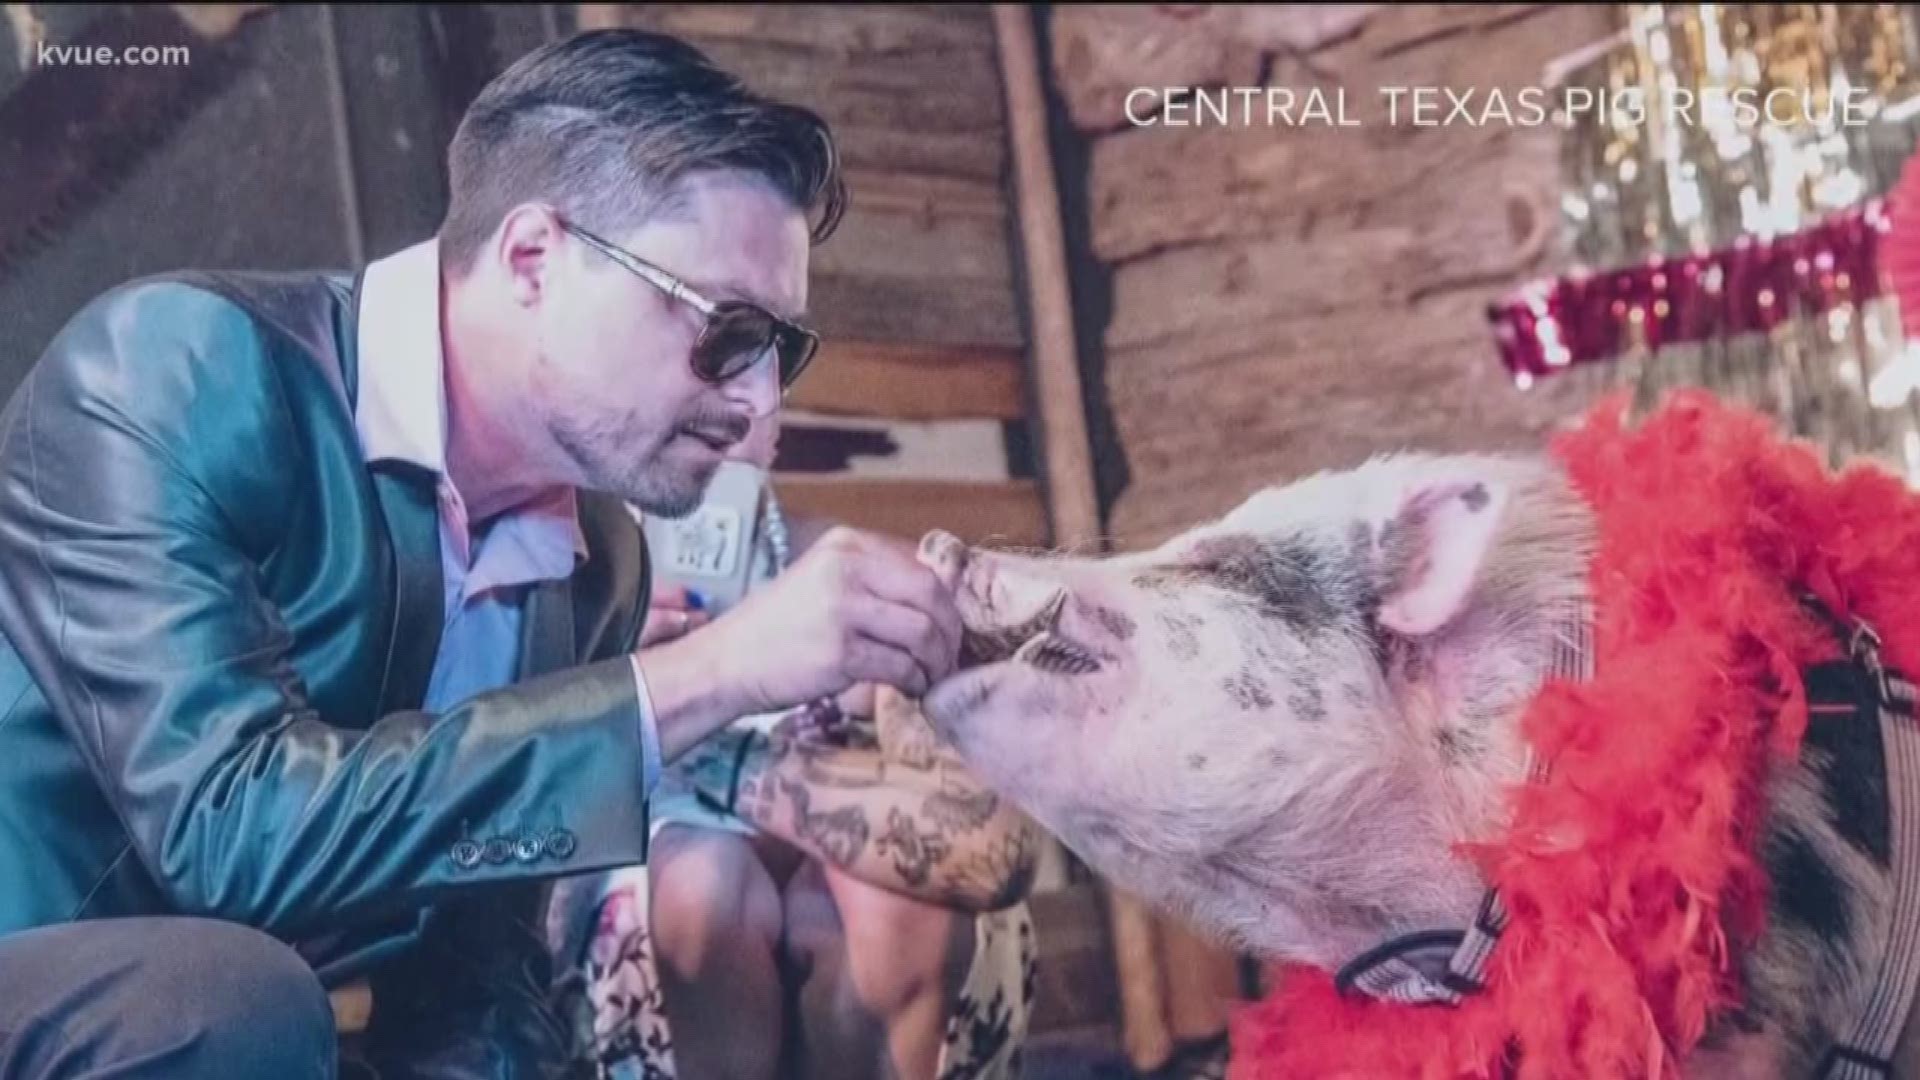 A pig pageant, cat videos, the Harlem Globetrotters and more!